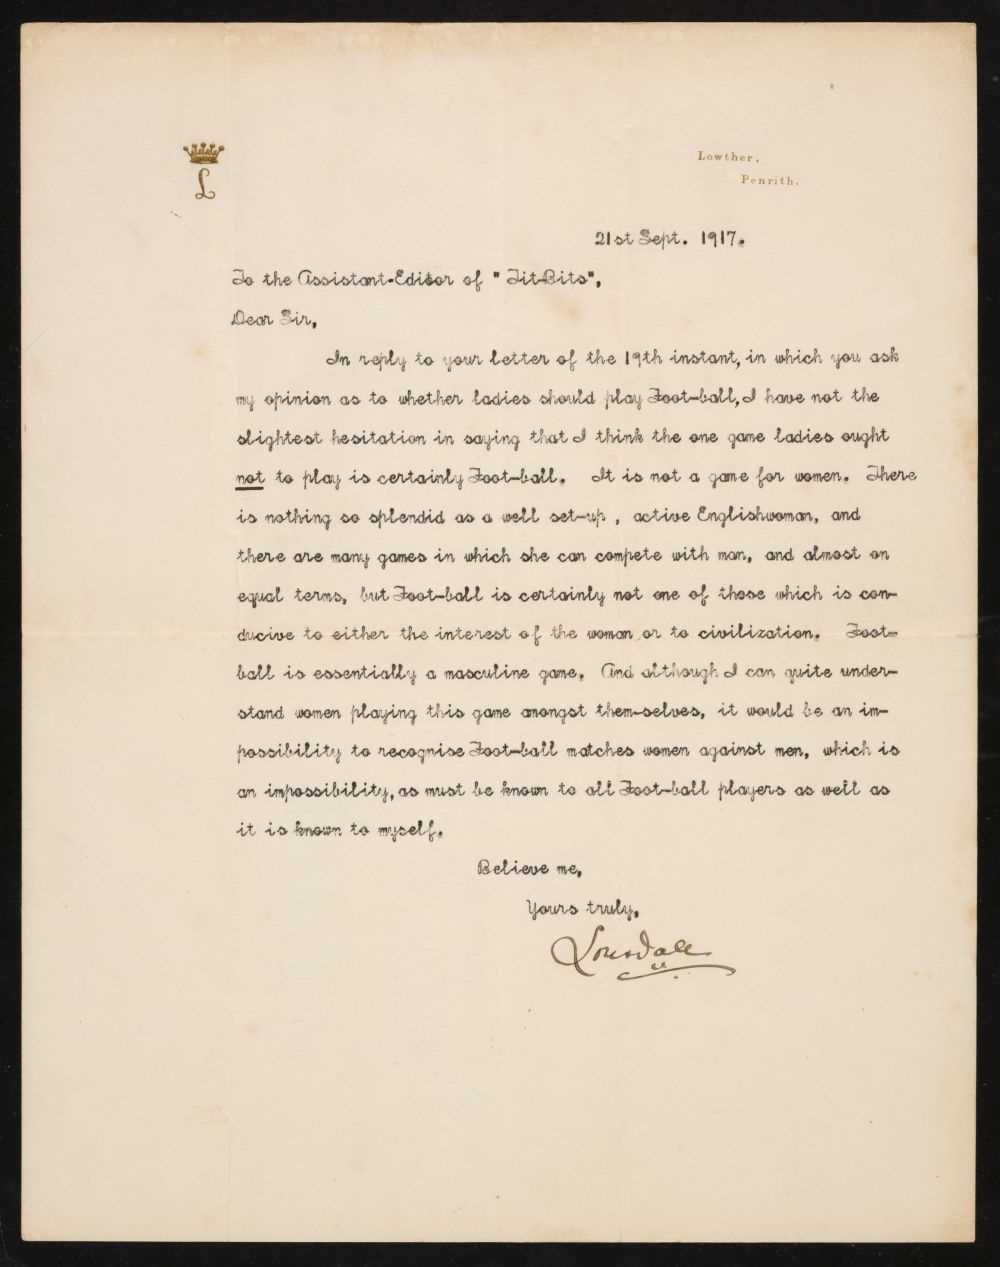 Lot 161 - Lowther (Hugh Cecil, 1857-1944, 5th Earl of Lonsdale). Two Typed Letters Signed, 1914 & 1917